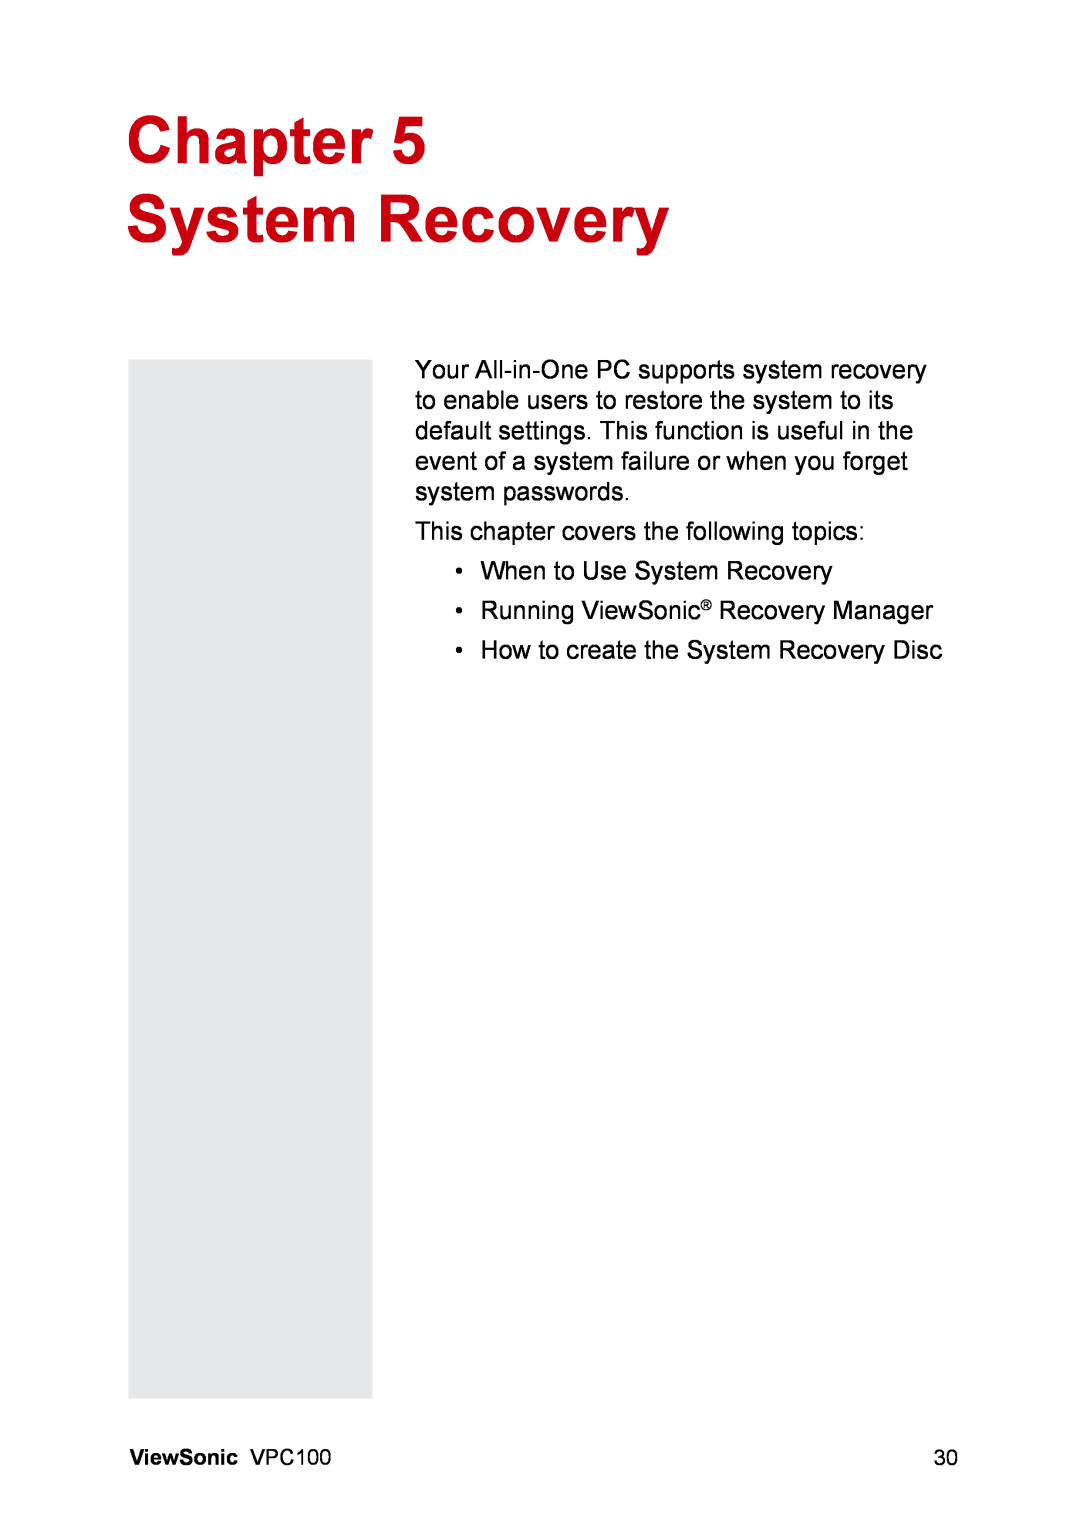 ViewSonic VPC100 manual Chapter System Recovery, This chapter covers the following topics, When to Use System Recovery 